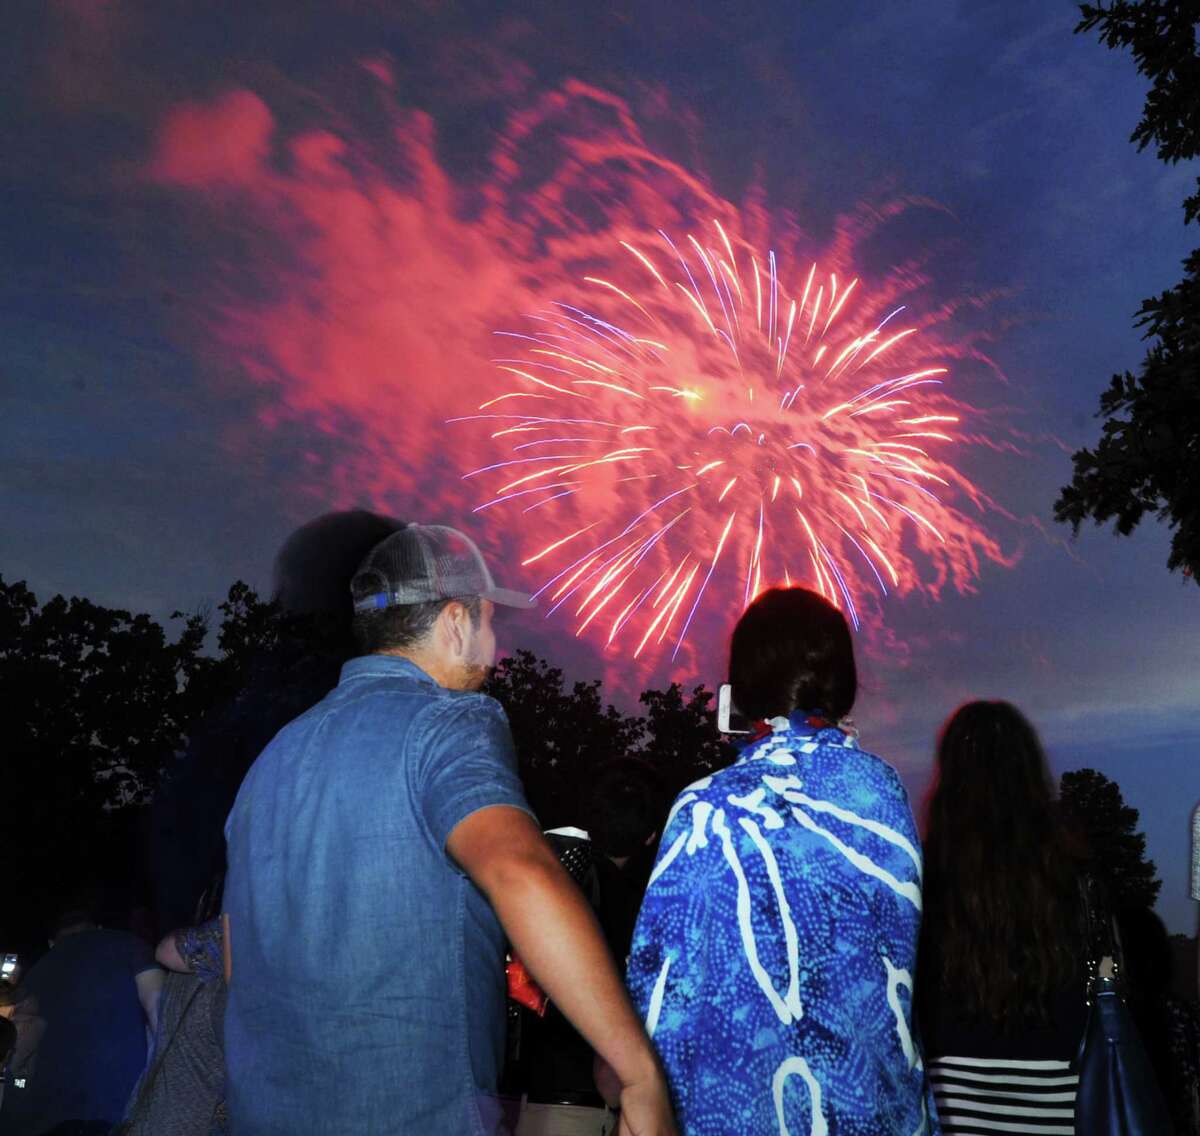 Spectators watch the annual Town of Greenwich fireworks display at Binney Park in Old Greenwich, Conn., Saturday, July 1, 2017.